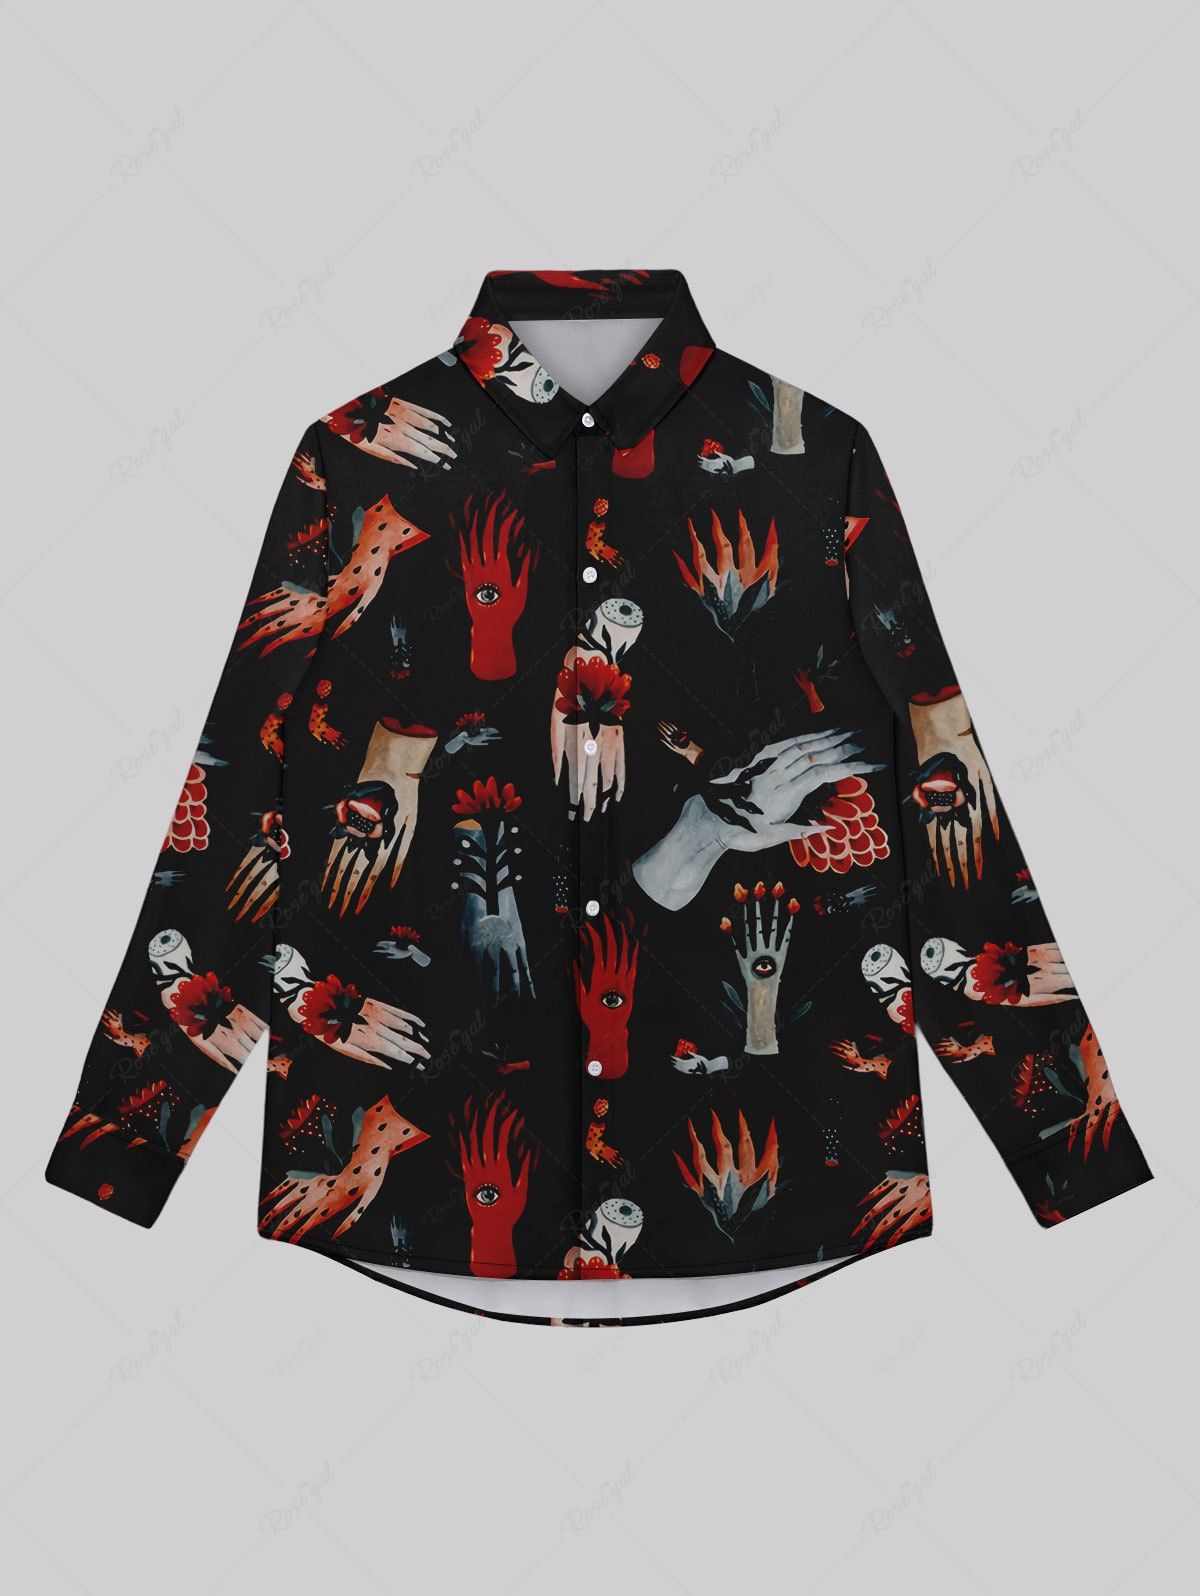 Unique Gothic Turn-down Collar Skeleton Bloody Hand Floral Eye Print Buttons Shirt For Men  